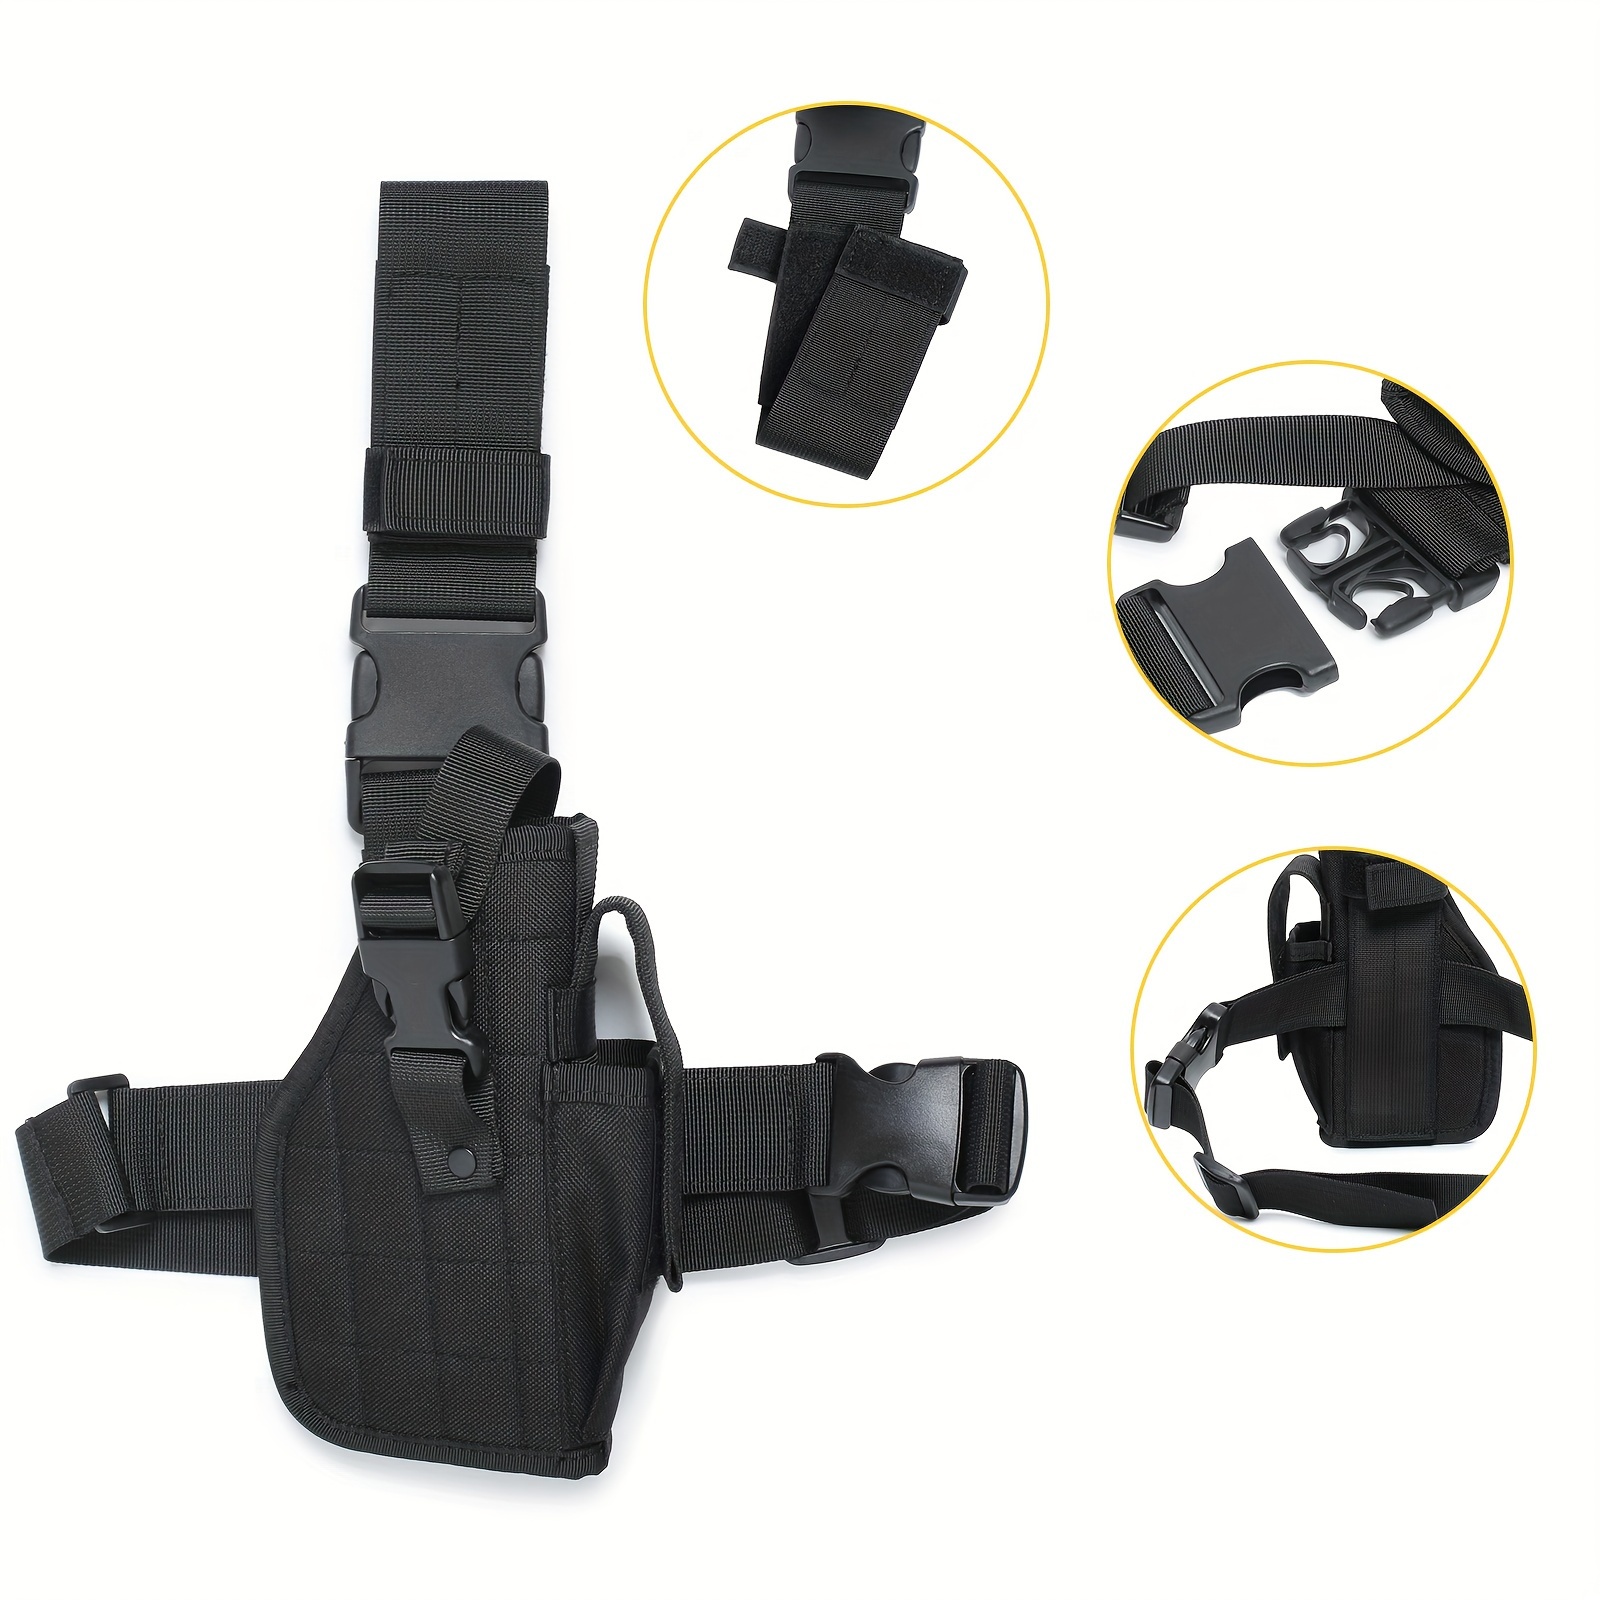 ASETIC Drop Leg Holster for Pistol- Right Handed Tactical Thigh Airsoft  Pistol Holster with Magazine Pouch Adjustable Gun Holster, Gun Holsters -   Canada